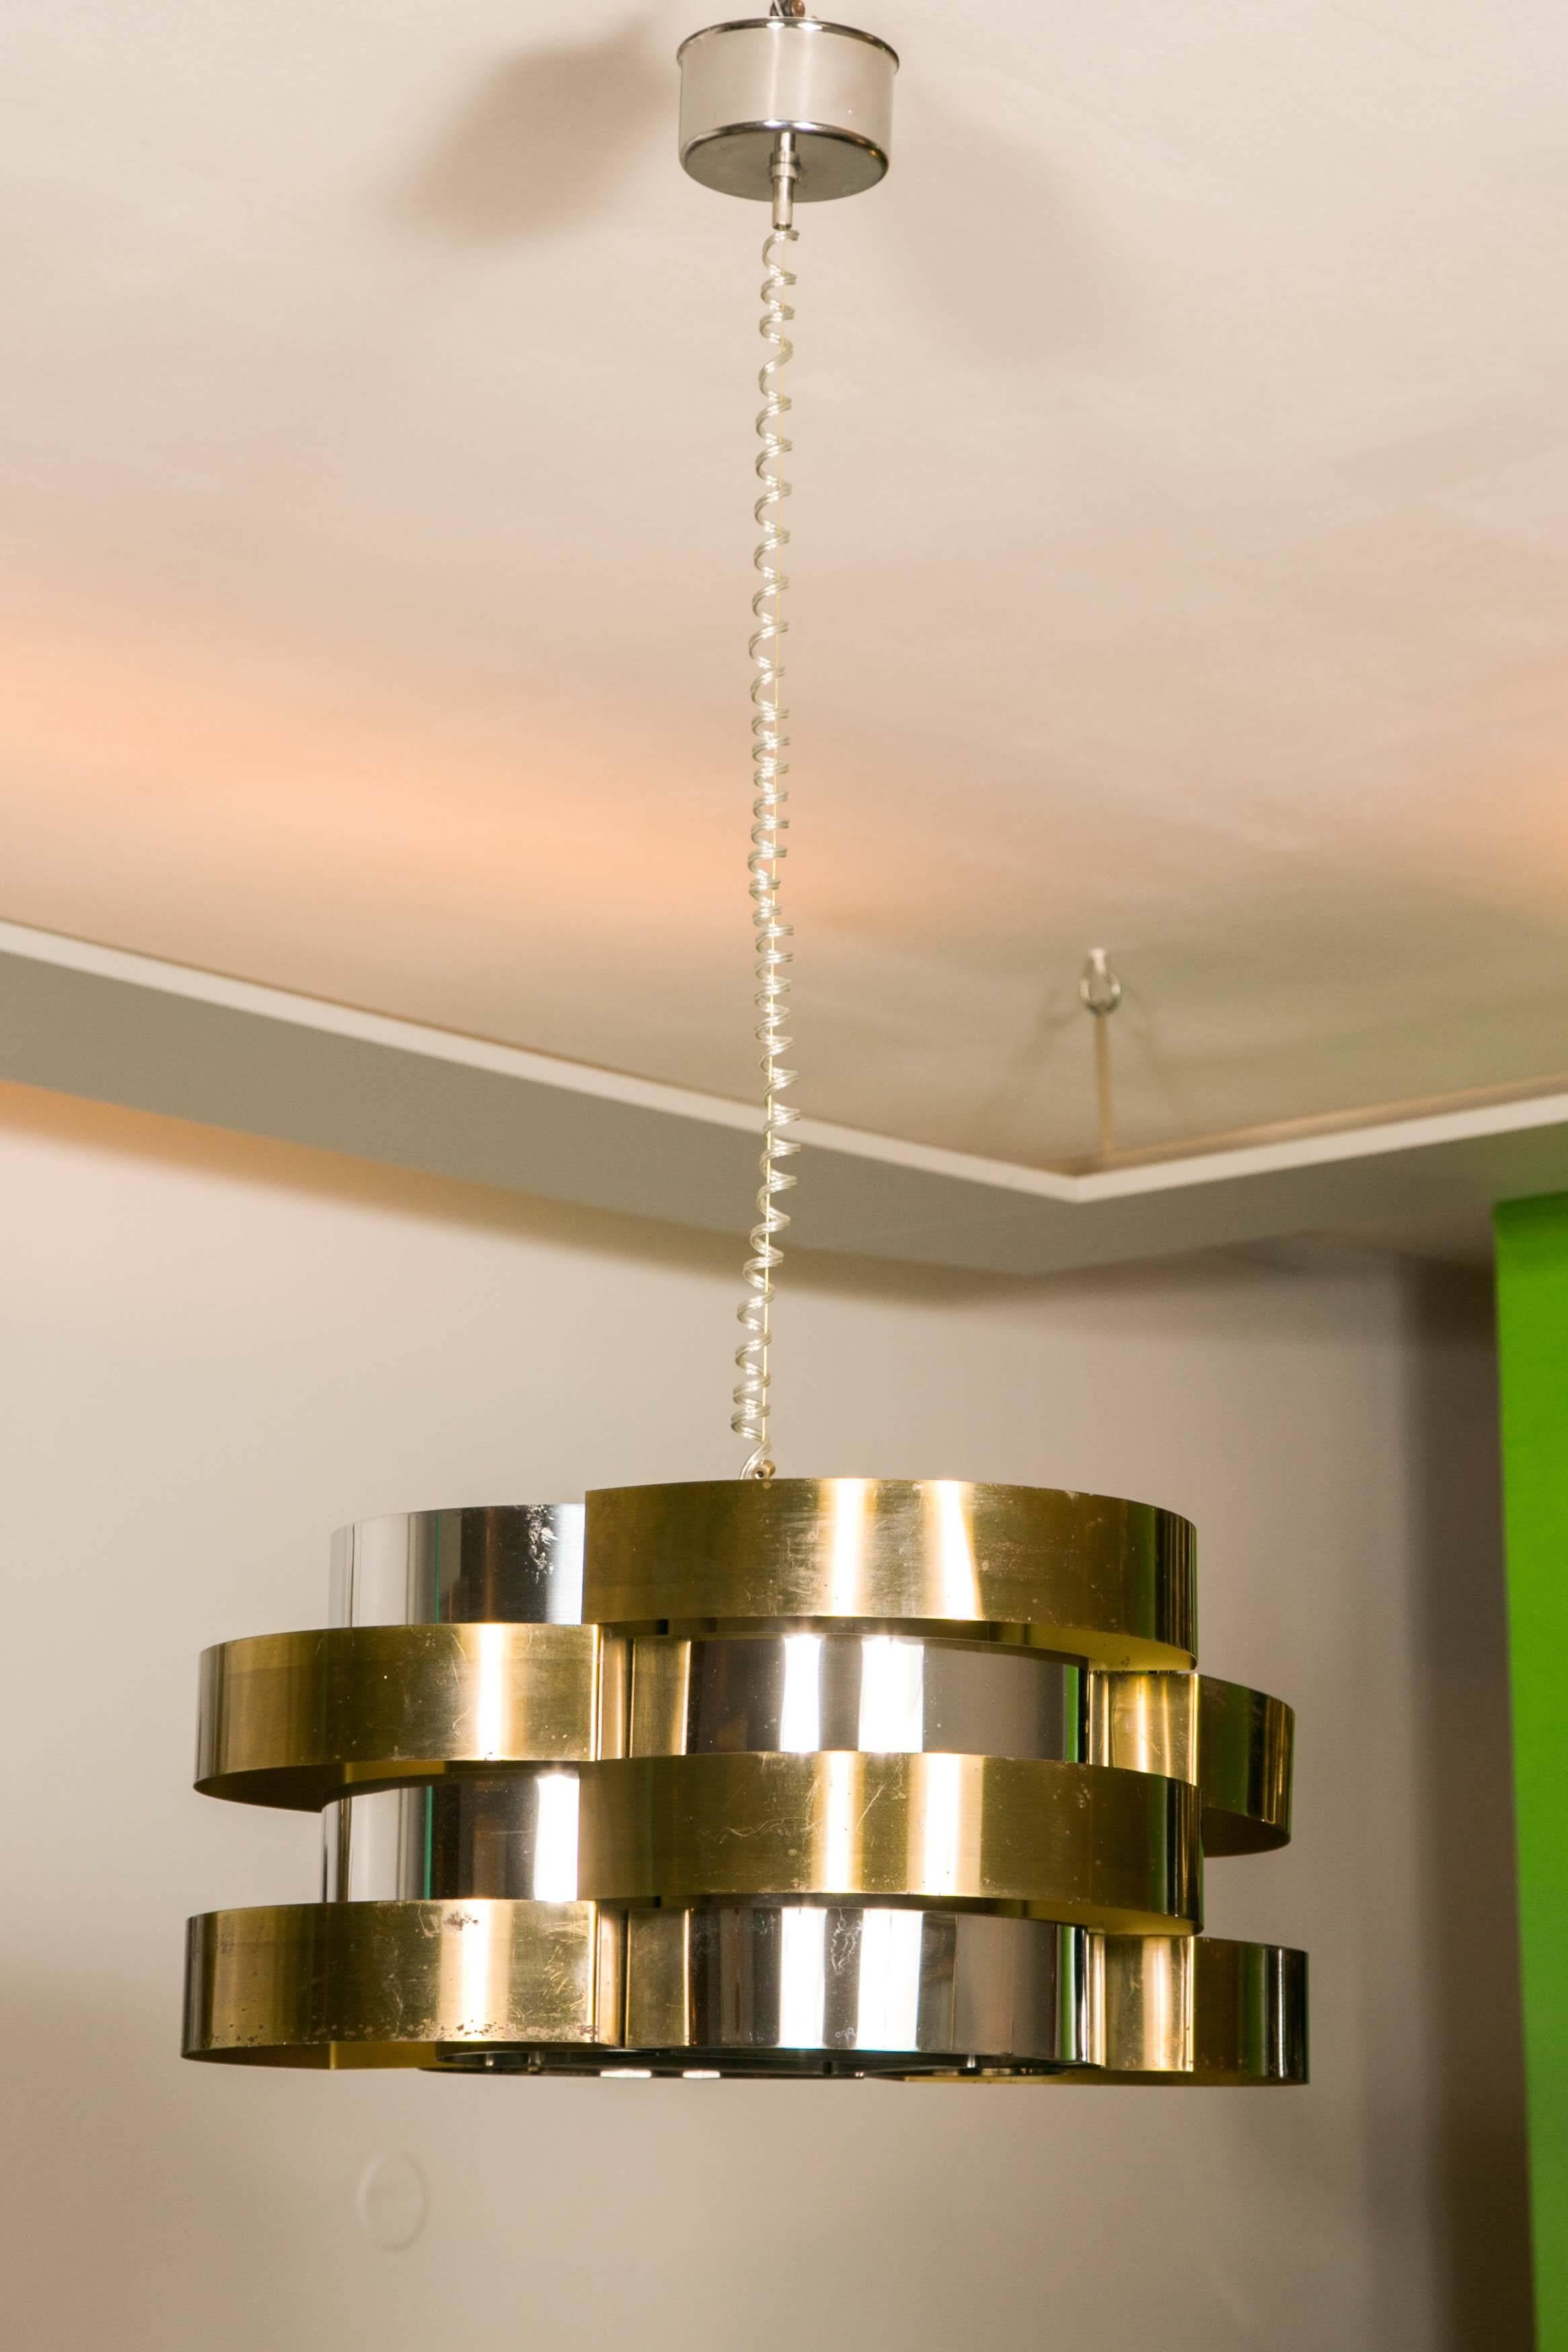 Elegant chandelier in steel and brass with a fine design typical of the 1970s.
With five lights inside.